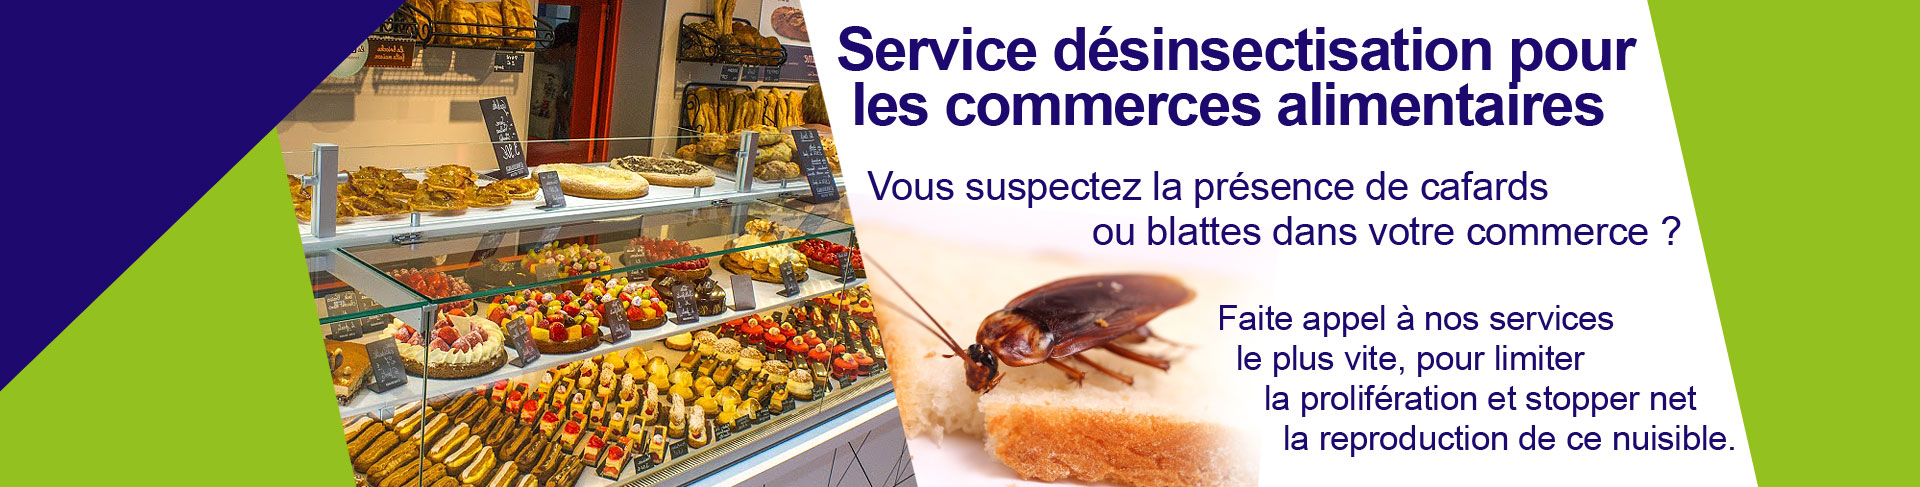 Service desinsectisation commerce alimentaire